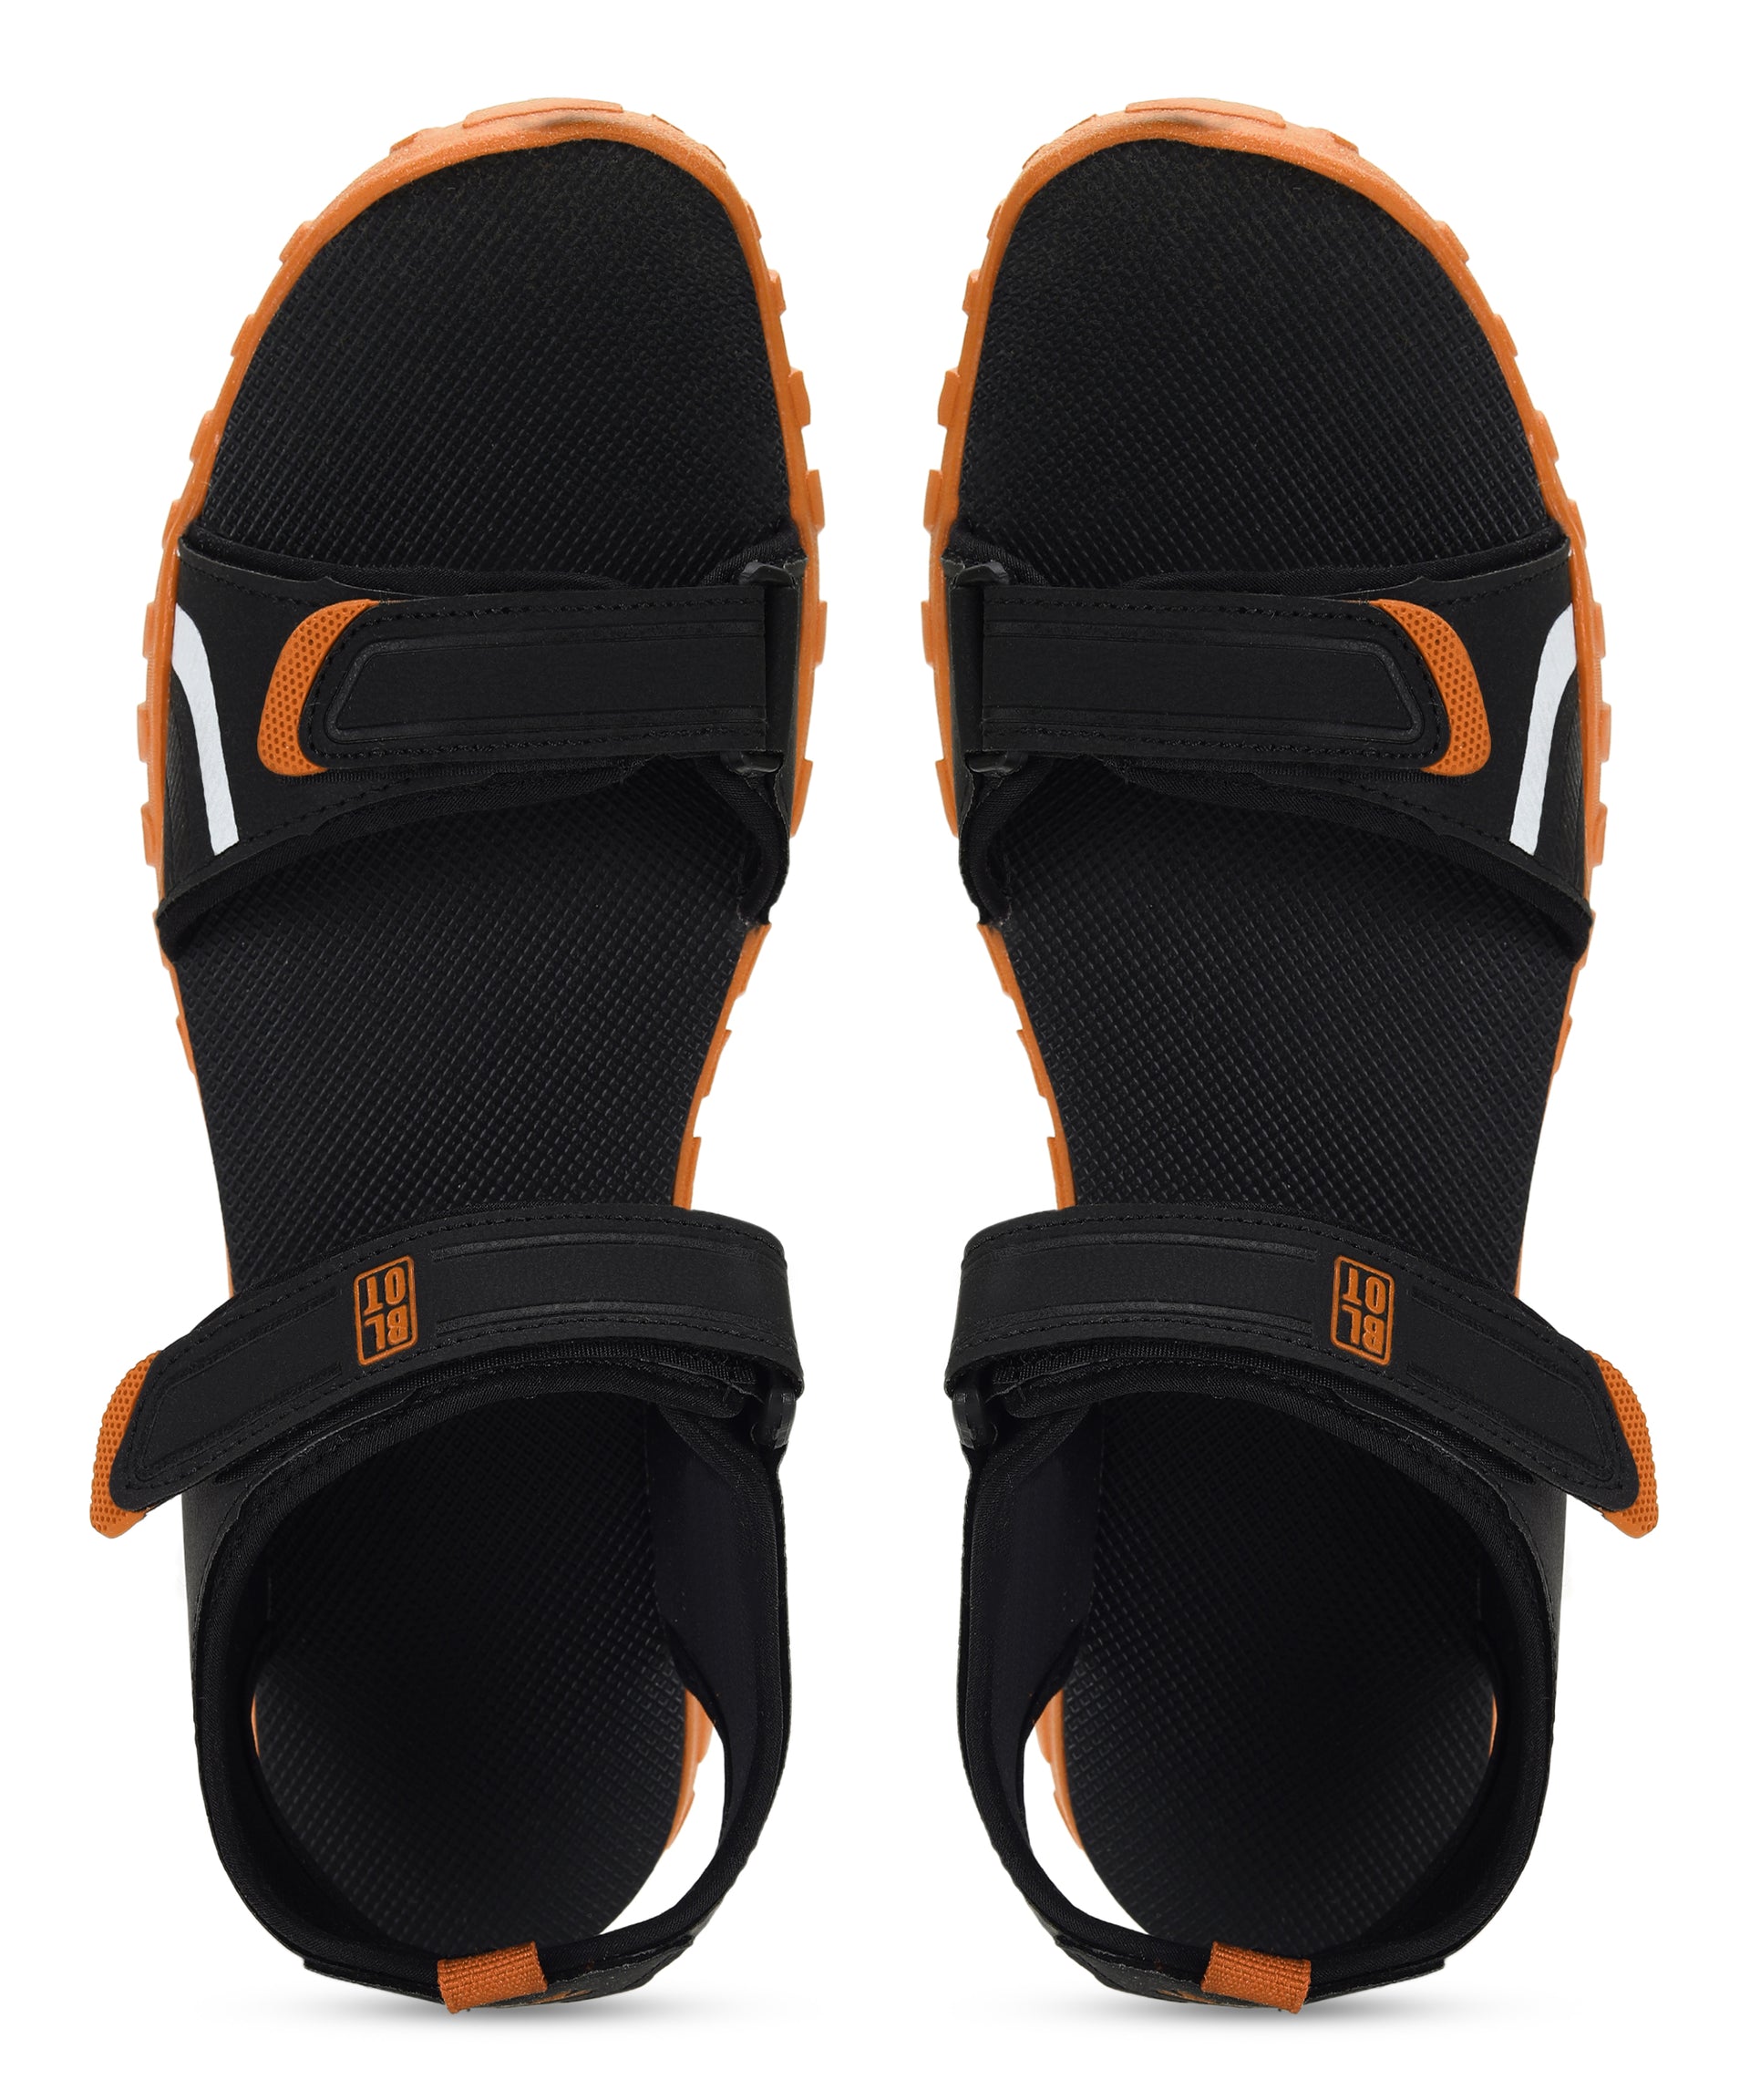 Paragon Blot K1423G Men Stylish Sandals | Comfortable Sandals for Daily Outdoor Use | Casual Formal Sandals with Cushioned Soles